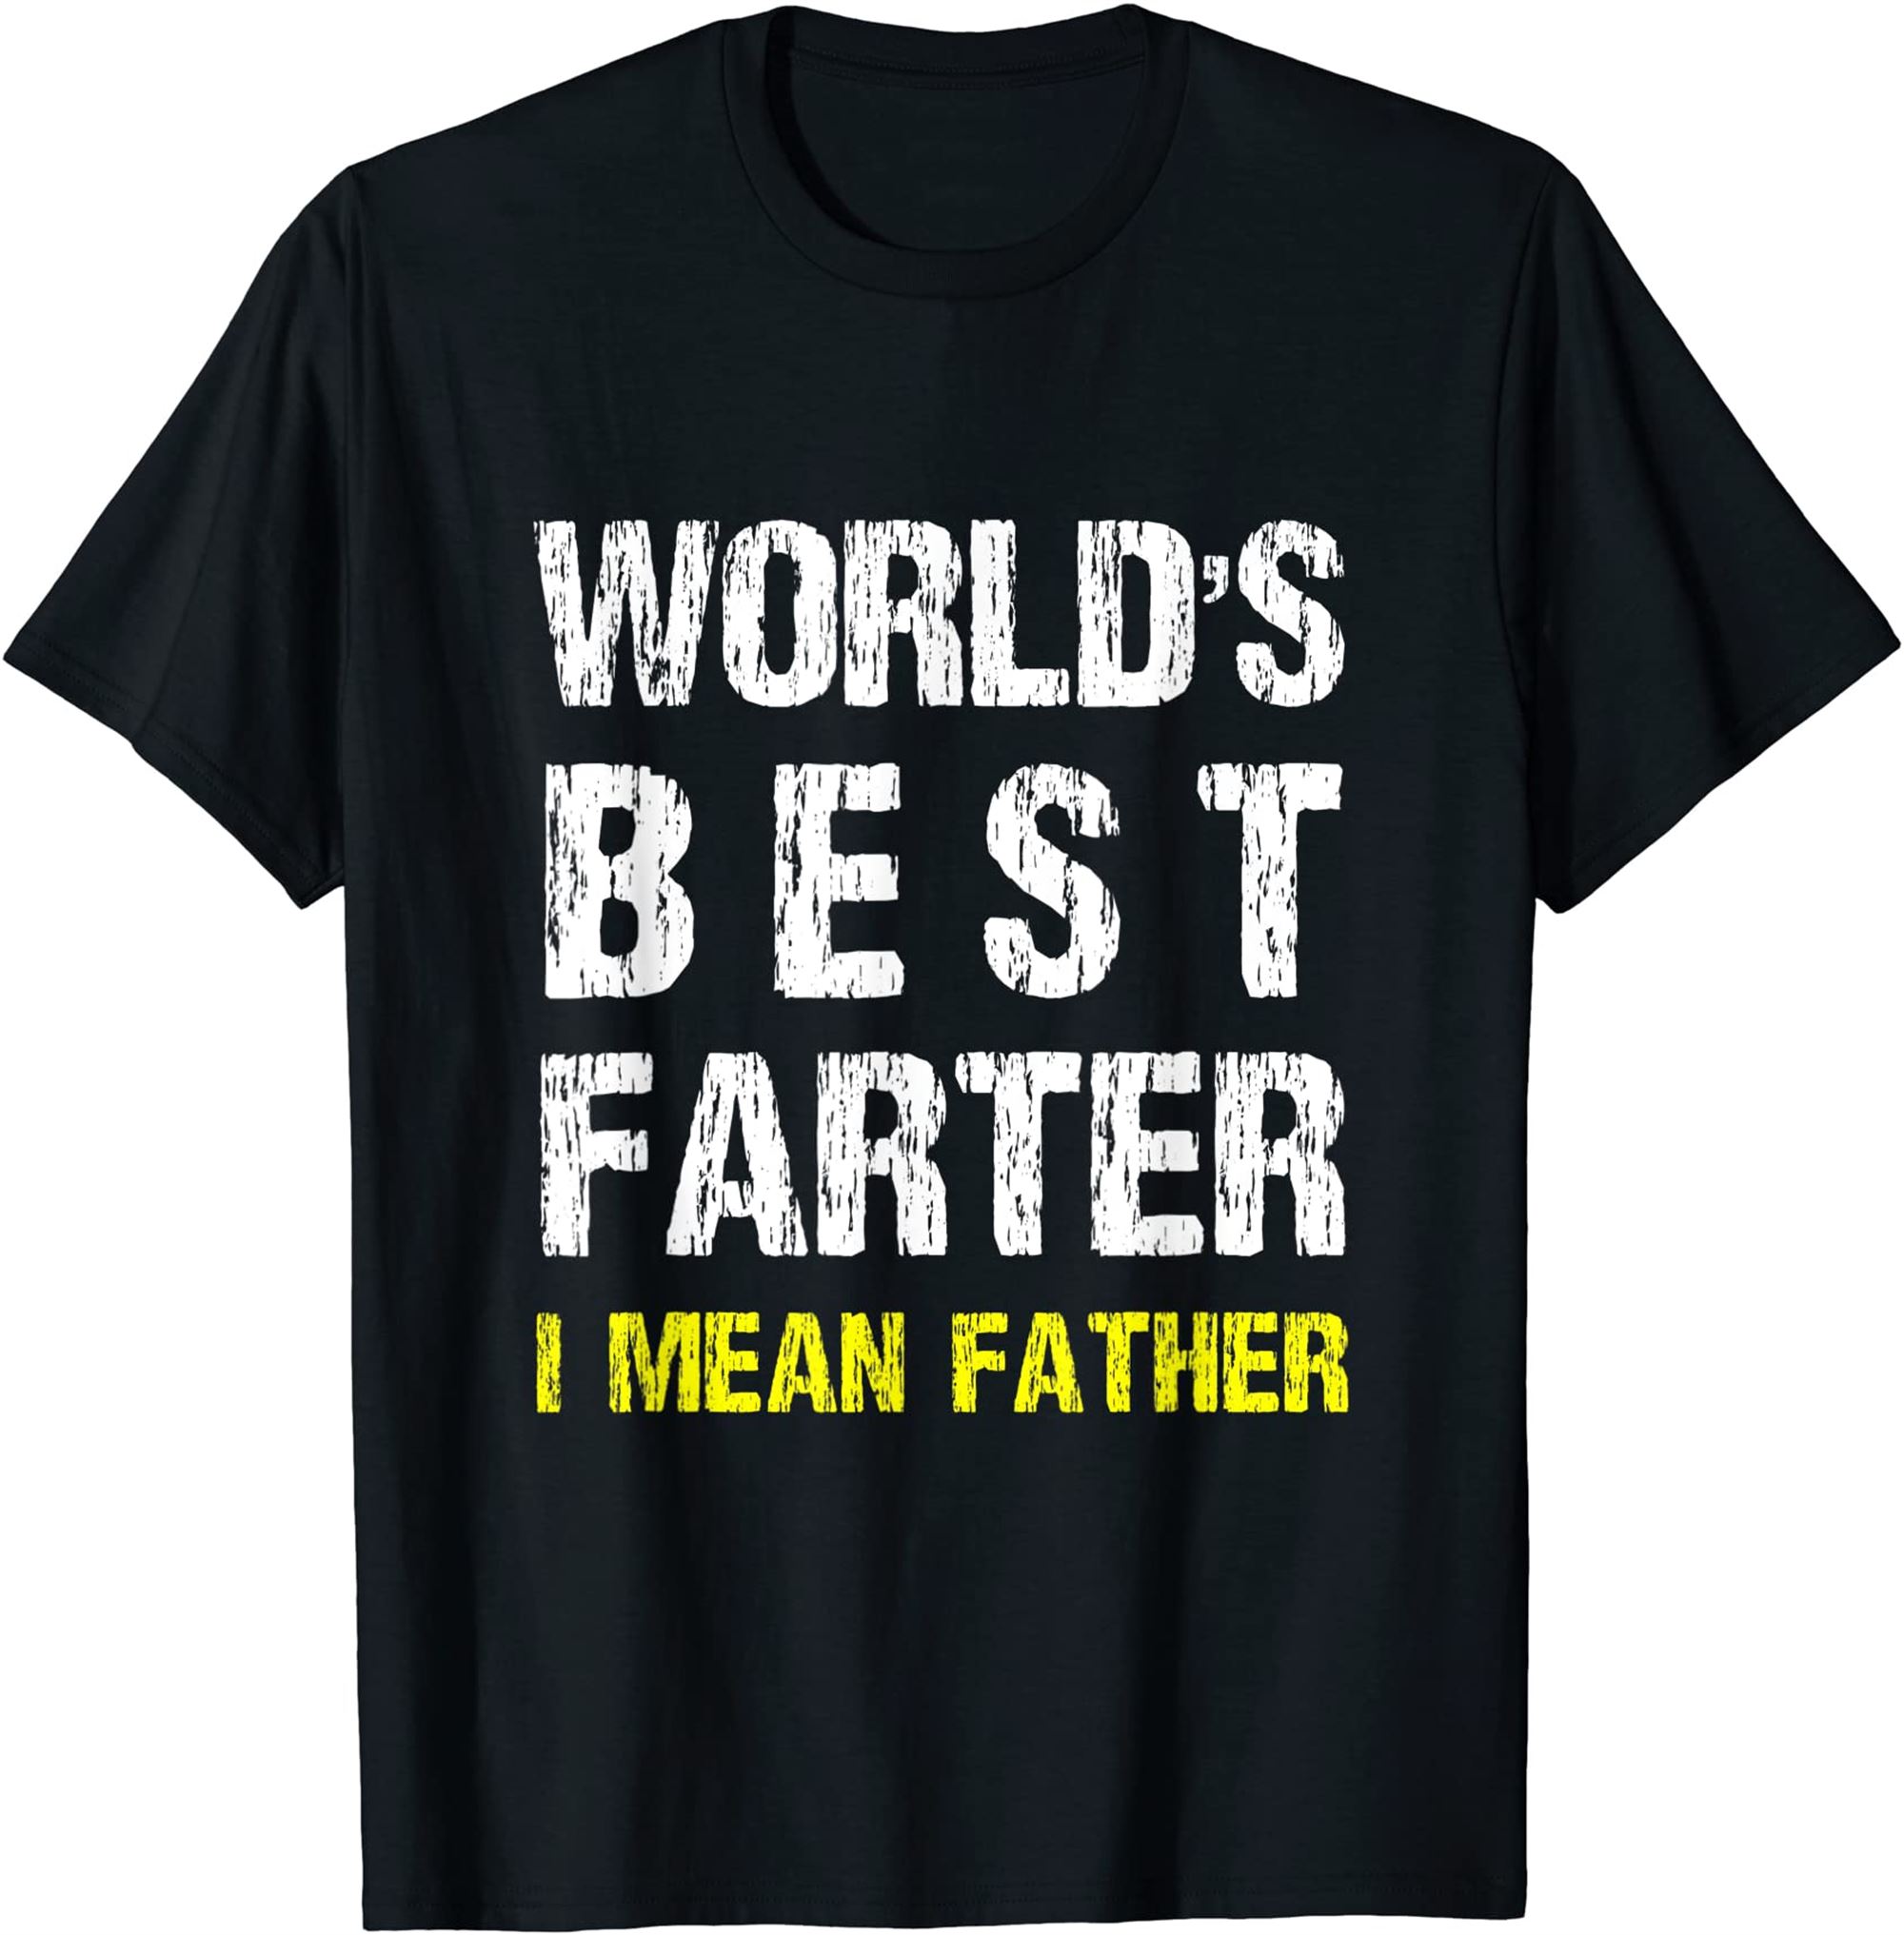 Best Farter Ever I Mean Father T-shirt Full Size Up To 5xl